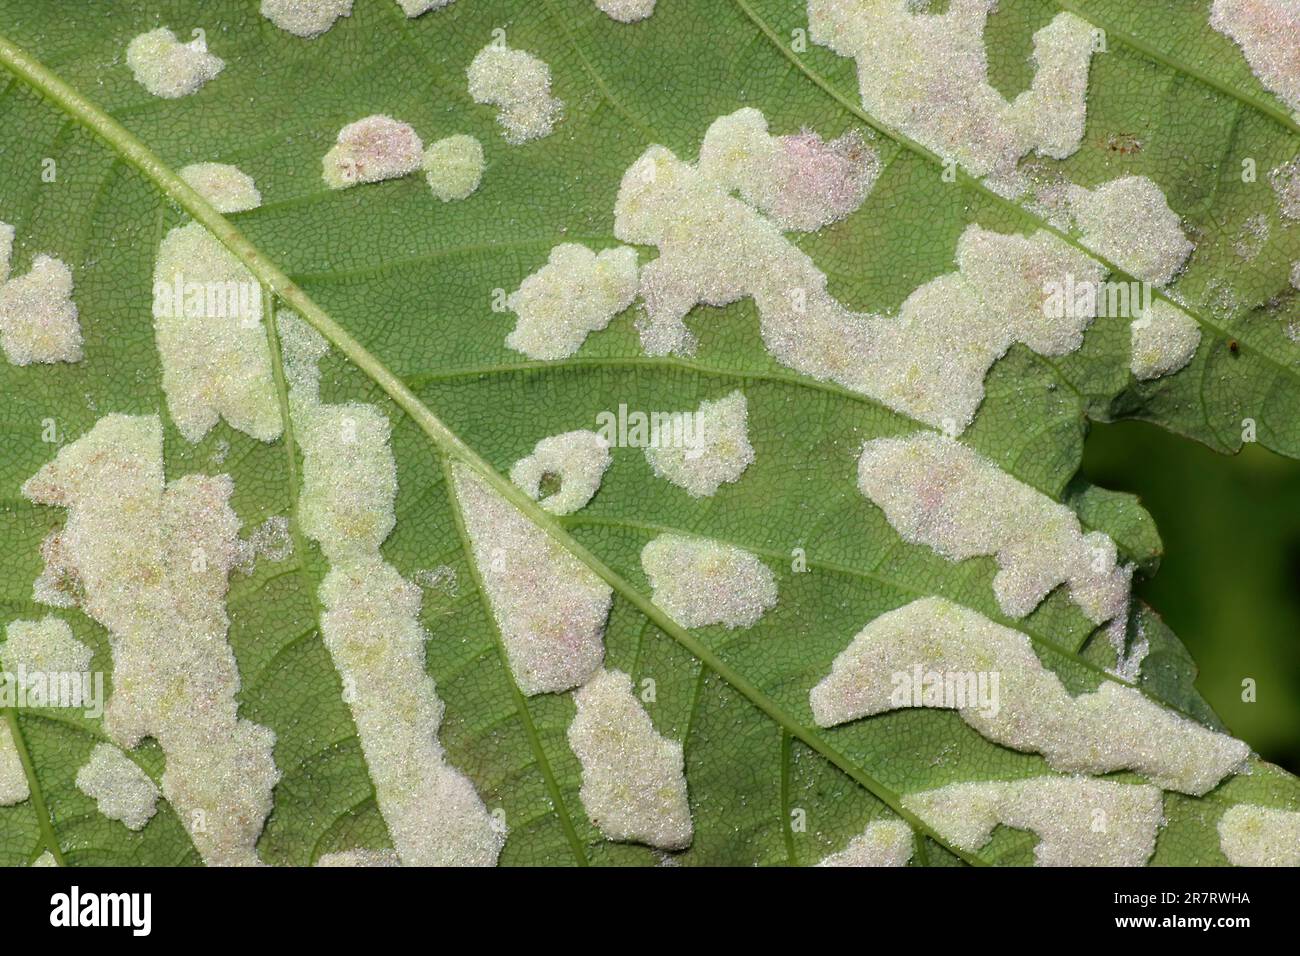 Sycamore leaves affected by Felt Galls caused by the Gall Mite Aceria pseudoplatani syn. Eriophyes pseudoplatani Stock Photo